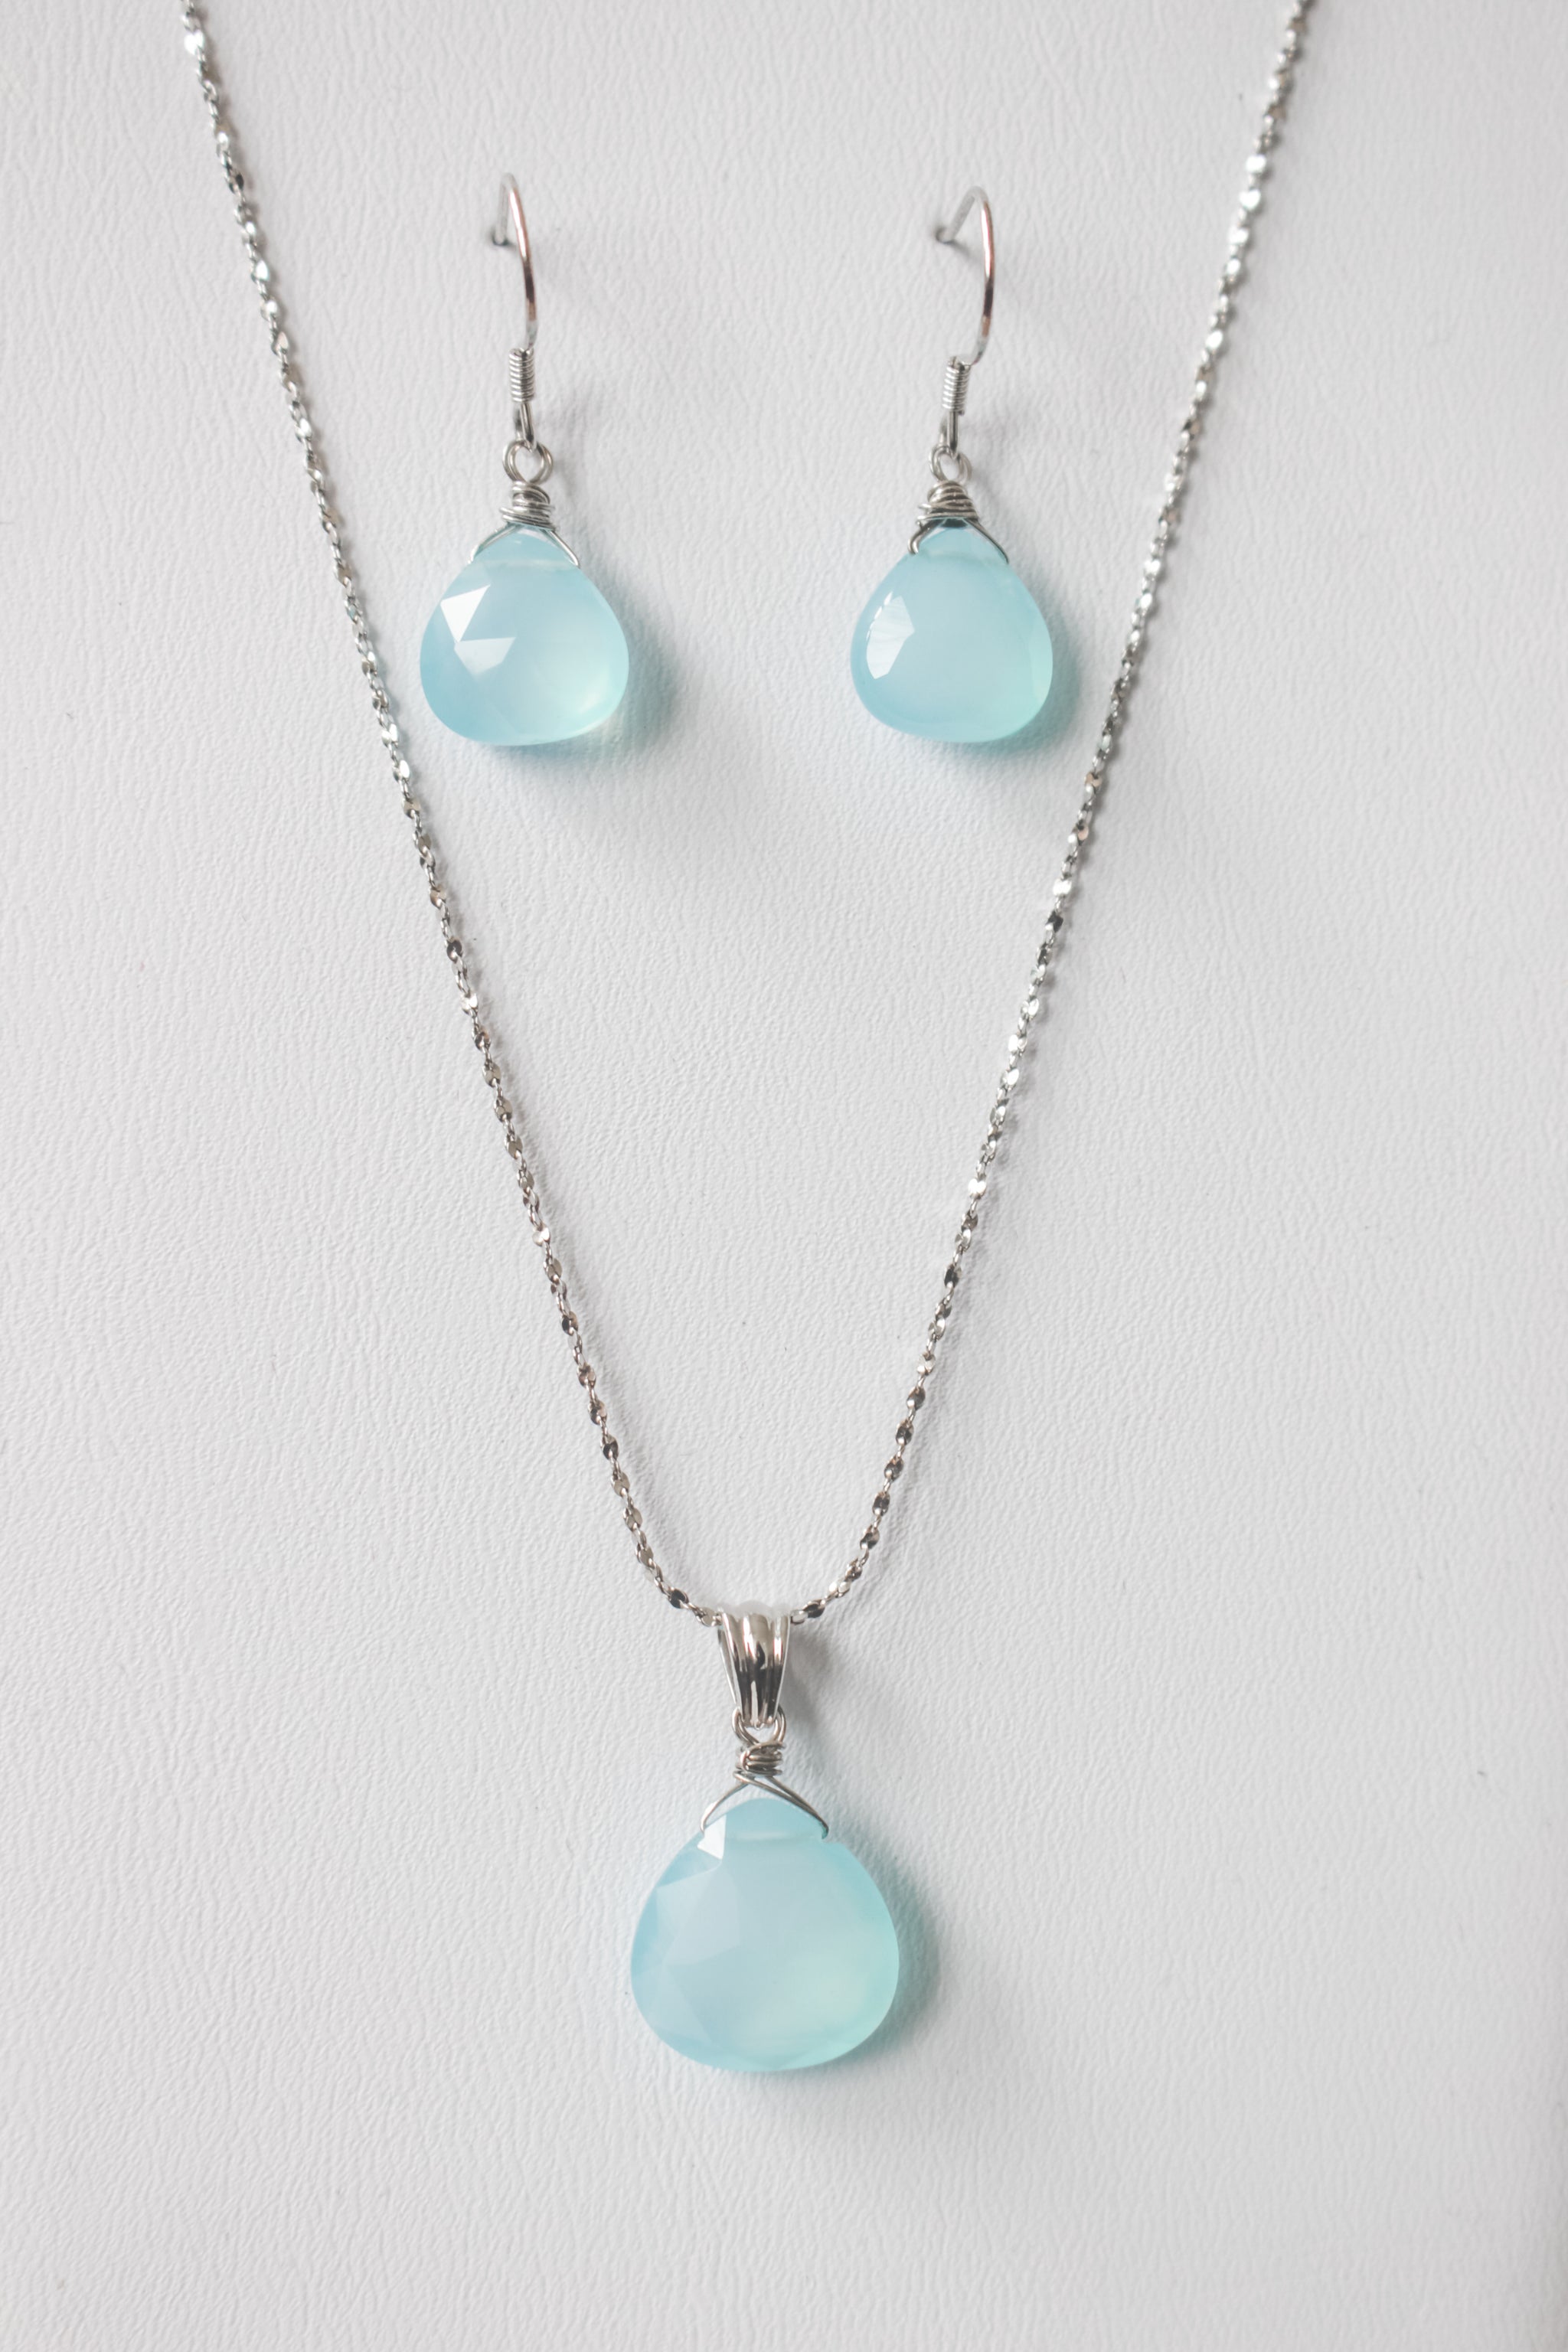 Aquamarine Earrings and Necklace